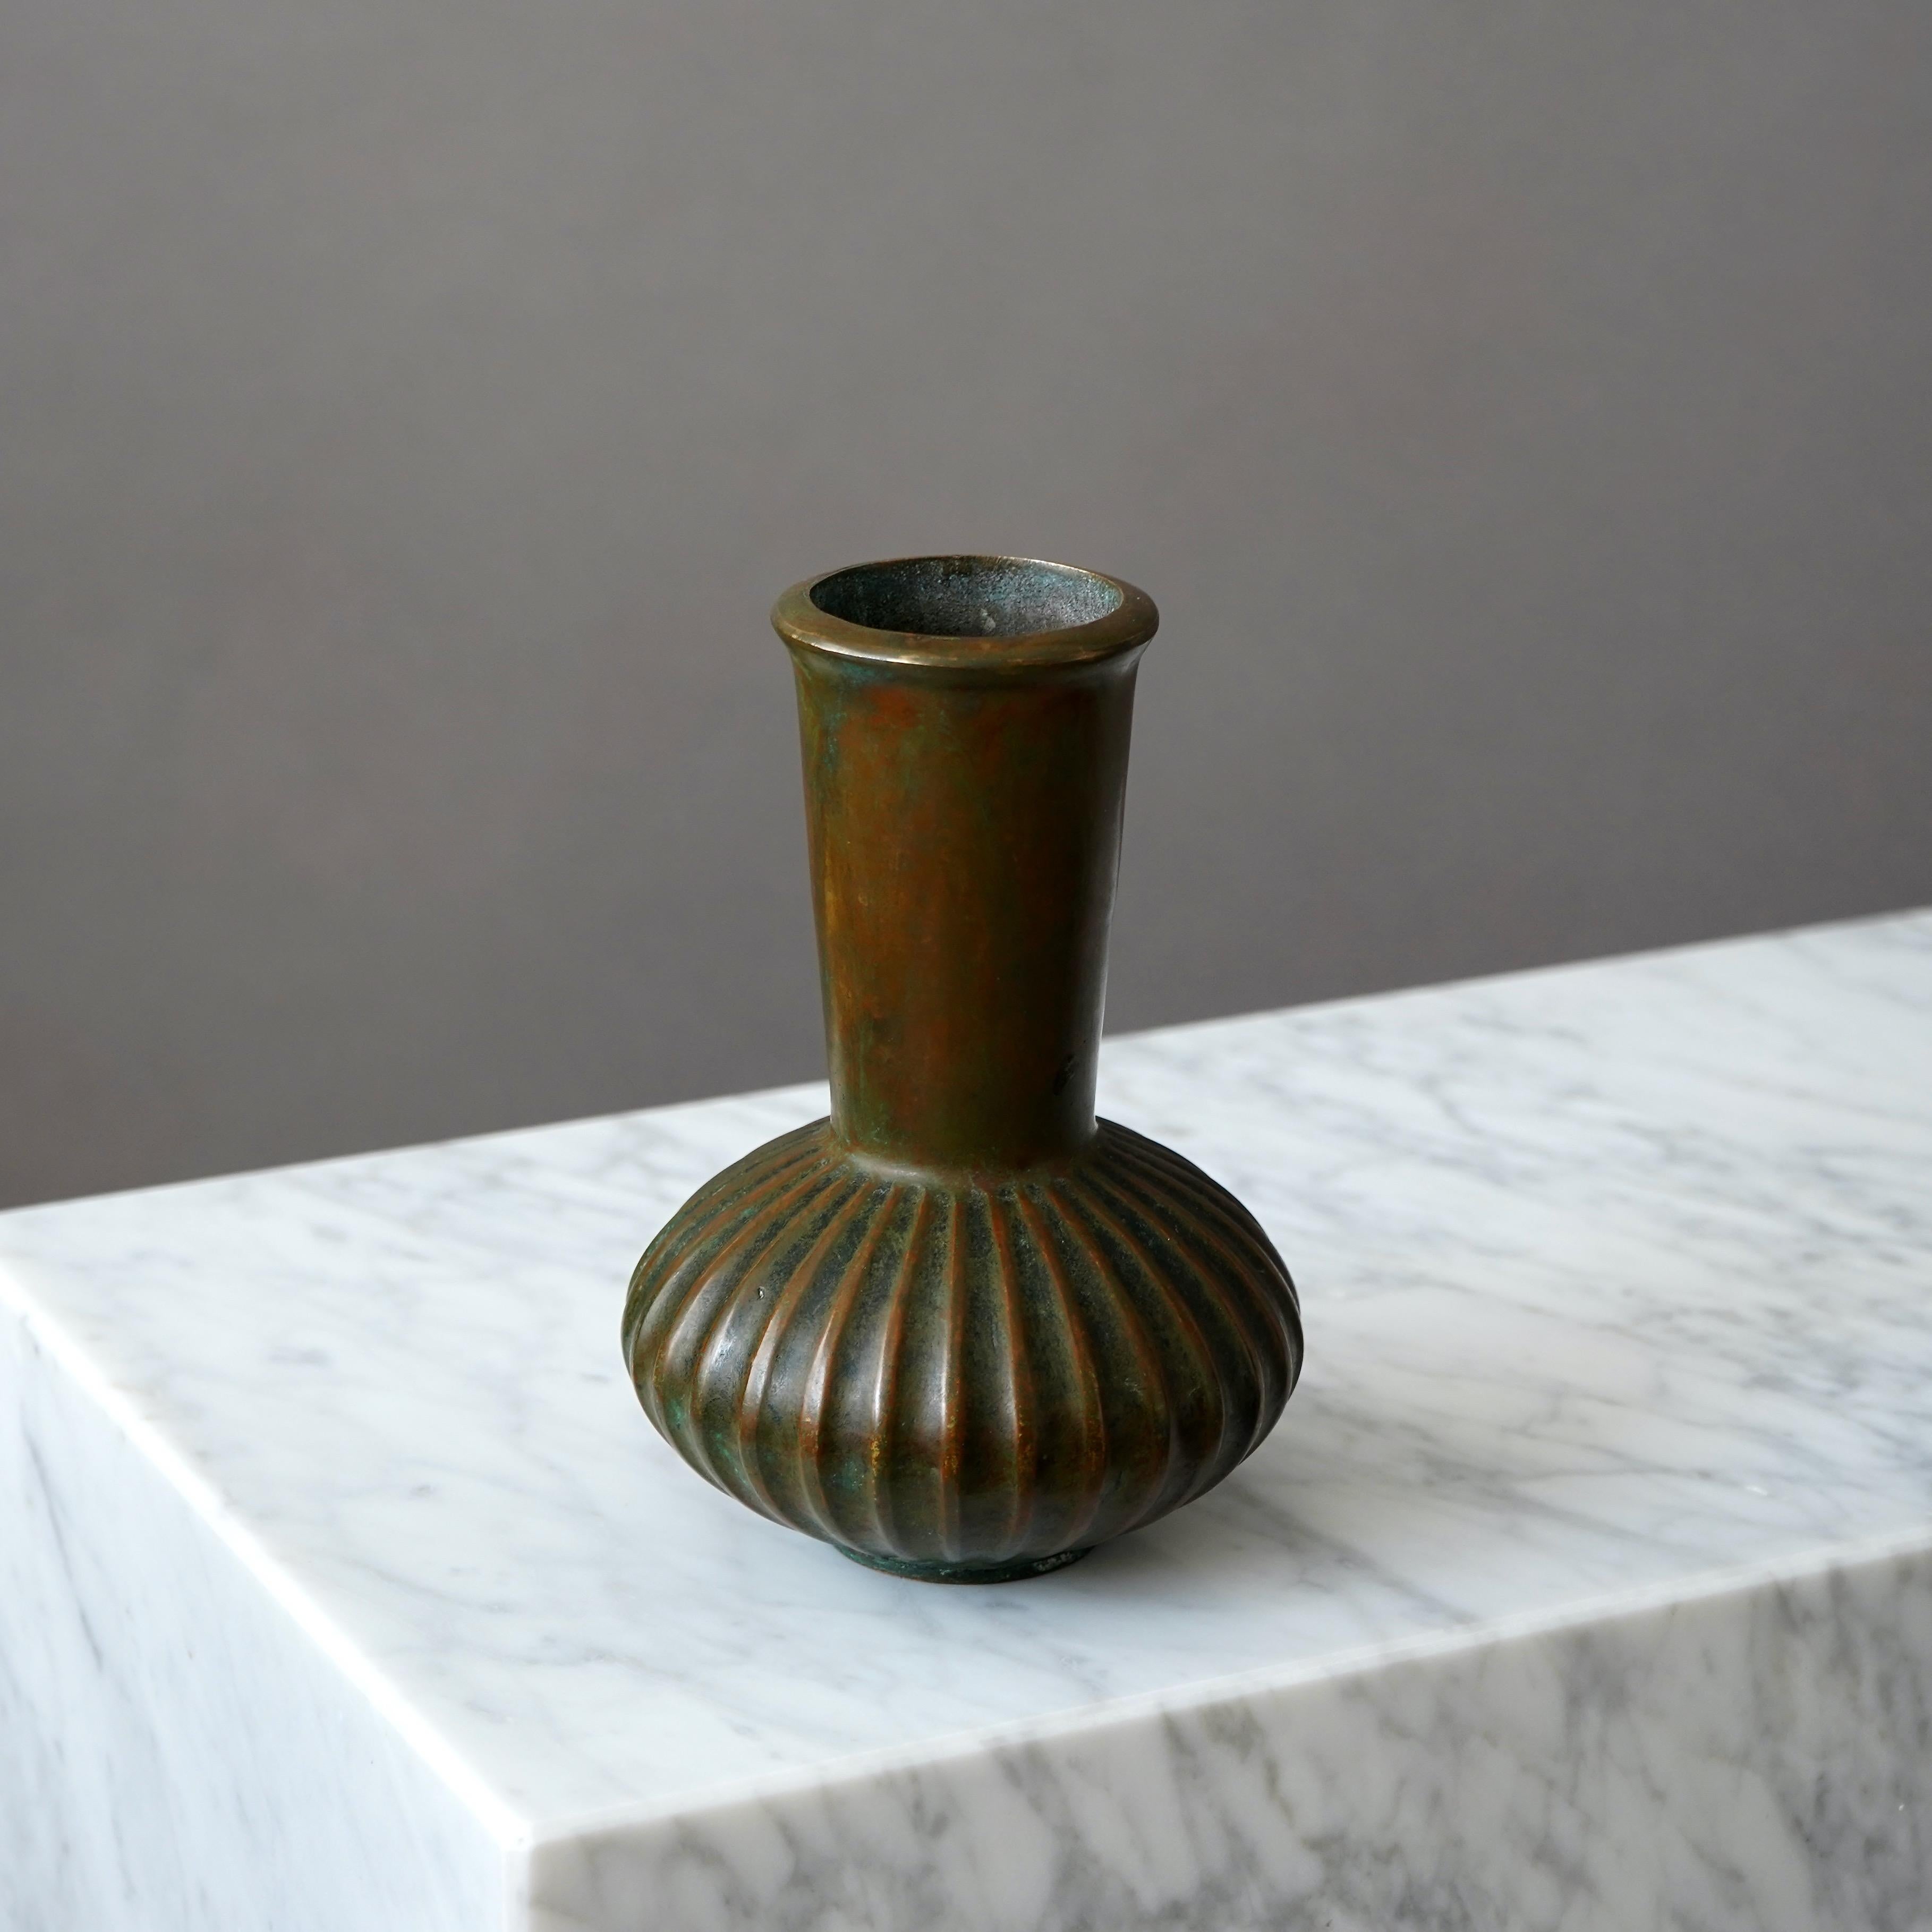 A beautiful bronze vase with amazing patina. Designed by Sune Bäckström in Malmoe, Sweden, 1920s.  

Great condition.
Stamped 'BRONS', model number '9130' and signature 'Sune Bäckström'.

Produced by Einar Bäckström Metallvarufabrik in Malmö,